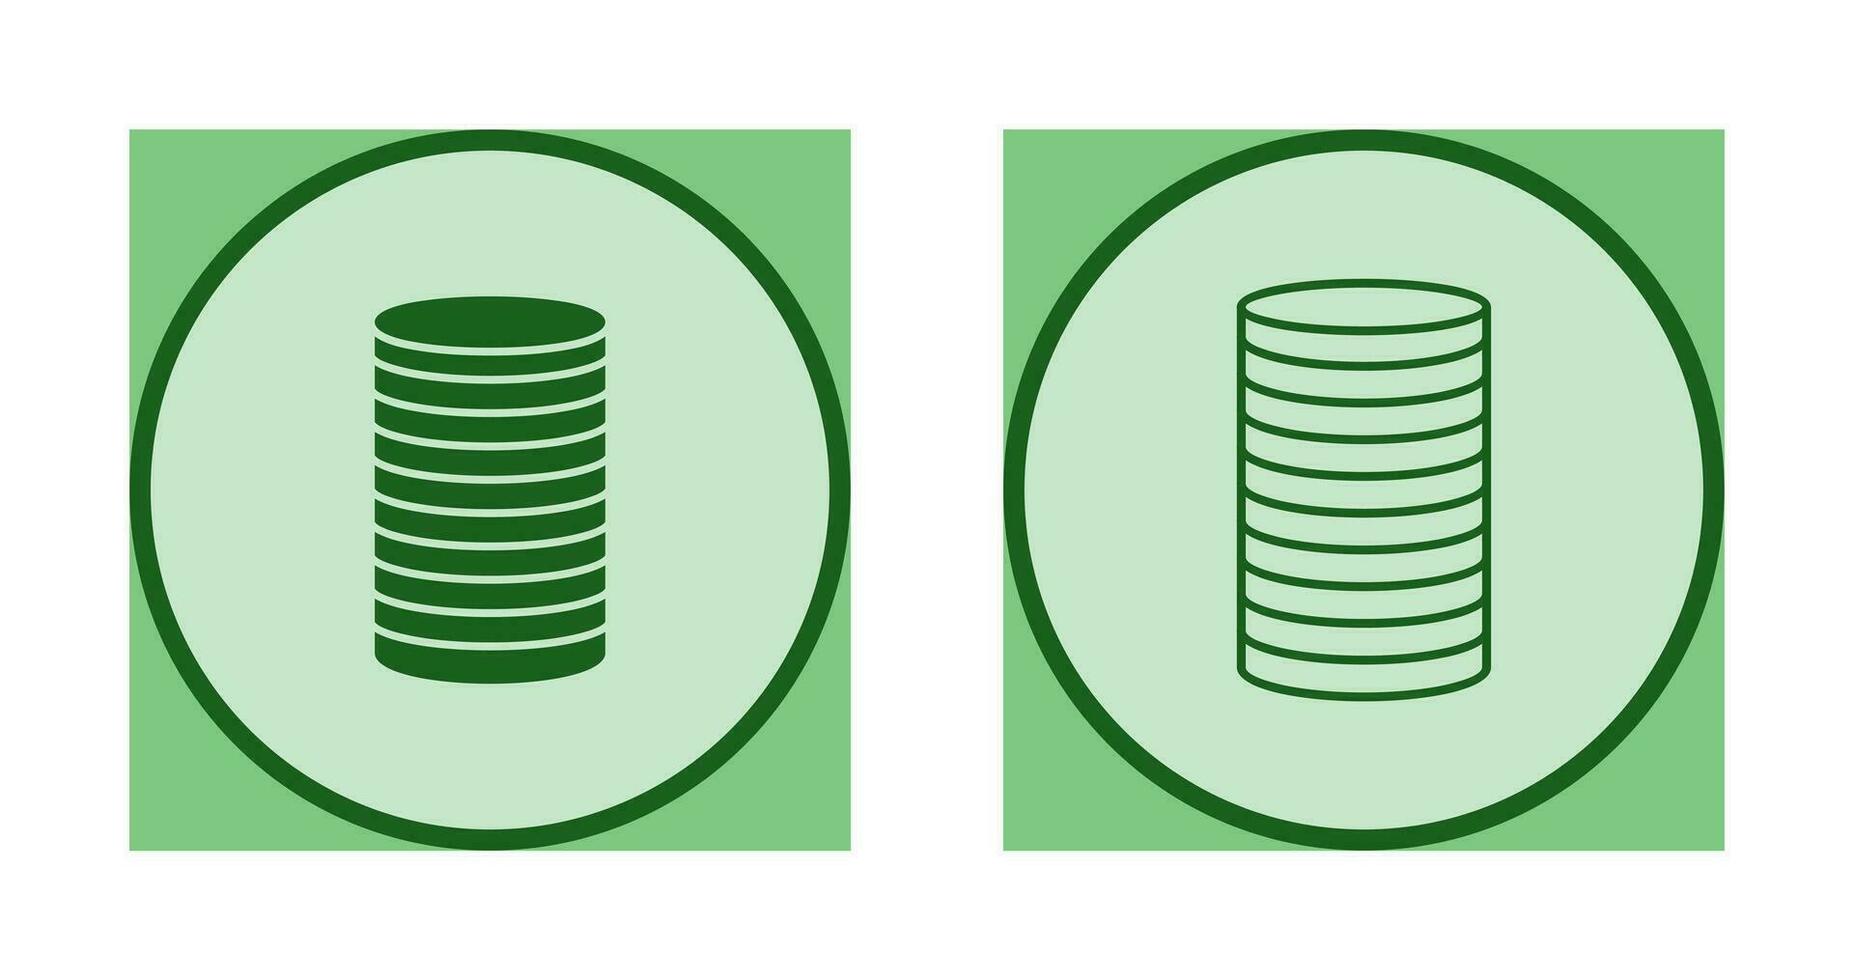 Stack of Coins Vector Icon